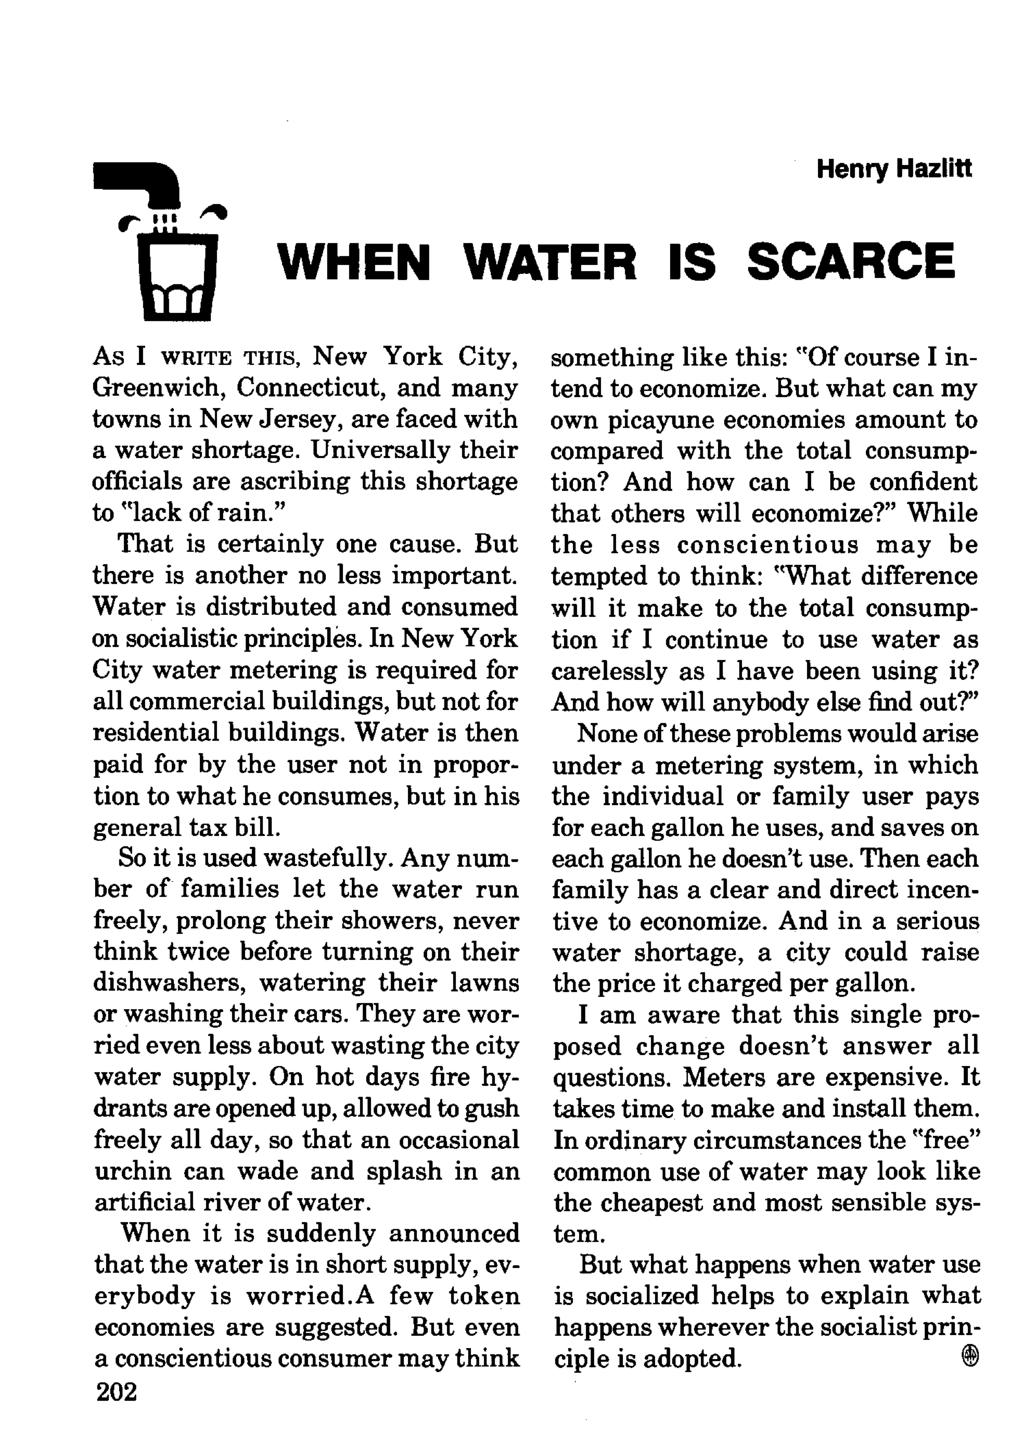 Henry Hazlitt WHEN WATER IS SCARCE As I WRITE THIS, New York City, Greenwich, Connecticut, and many towns in New Jersey, are faced with a water shortage.